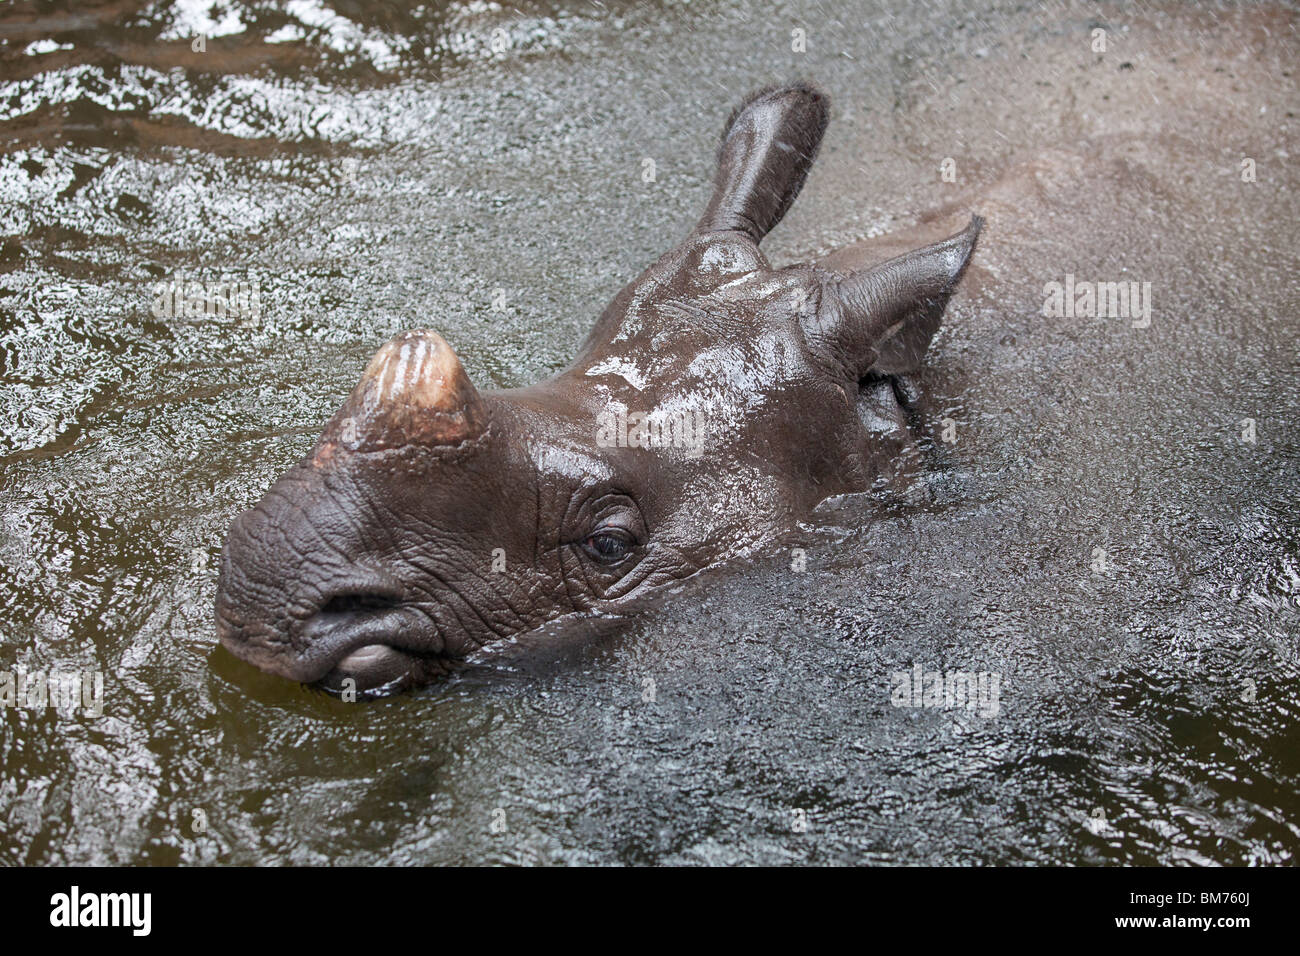 A female Indian Rhinocerous in water at the West Midland Safari PArk, Bewdley, Worcestershire, England, UK. Stock Photo